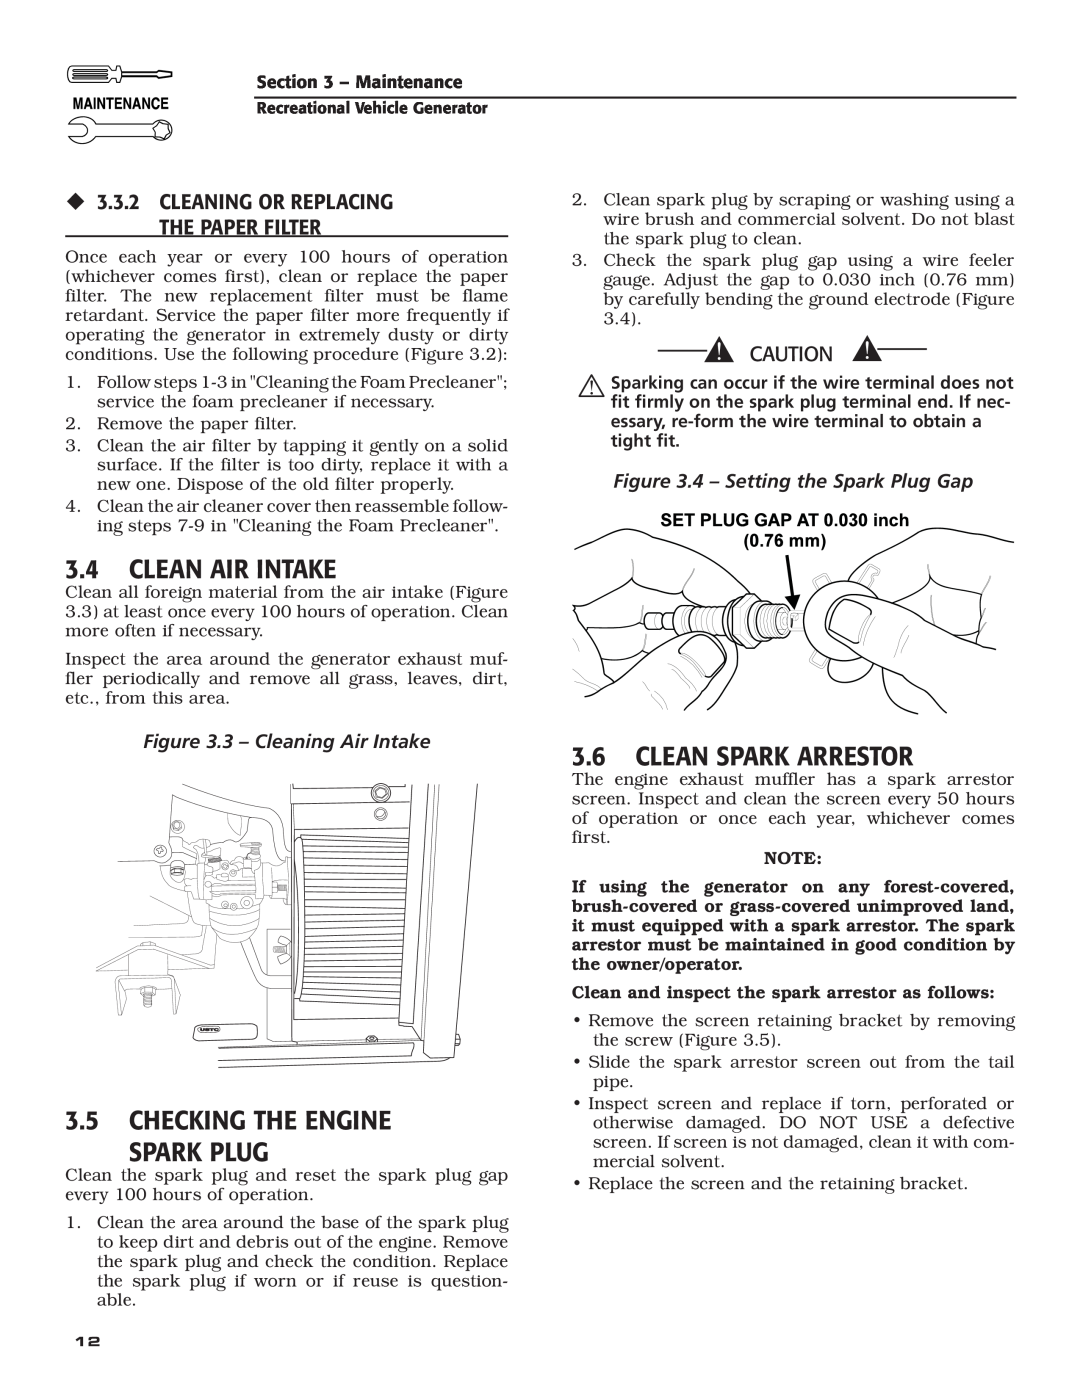 Generac Power Systems 004701-0 owner manual 3.4CLEAN AIR INTAKE, 3.5CHECKING THE ENGINE SPARK PLUG, 3.6CLEAN SPARK ARRESTOR 